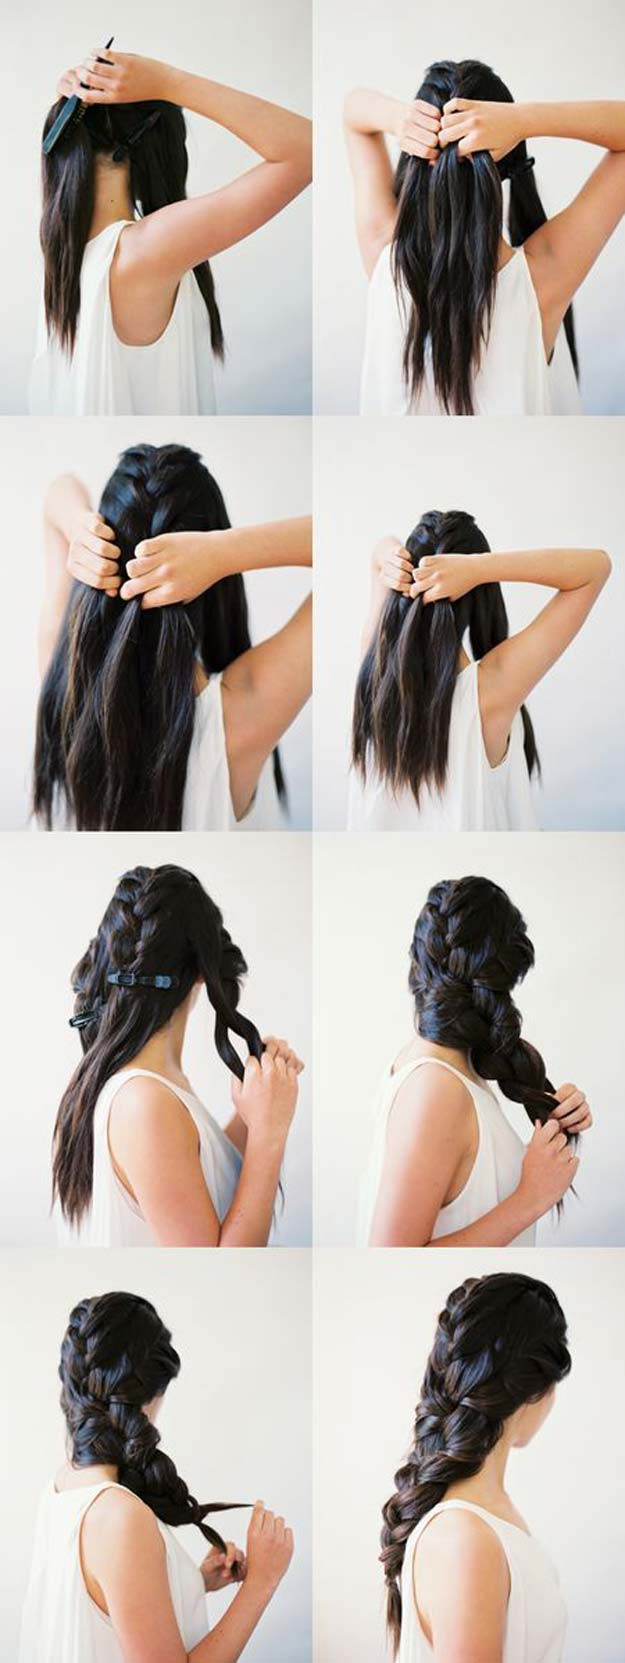 Easy Hairstyles For Beginners
 41 DIY Cool Easy Hairstyles That Real People Can Actually